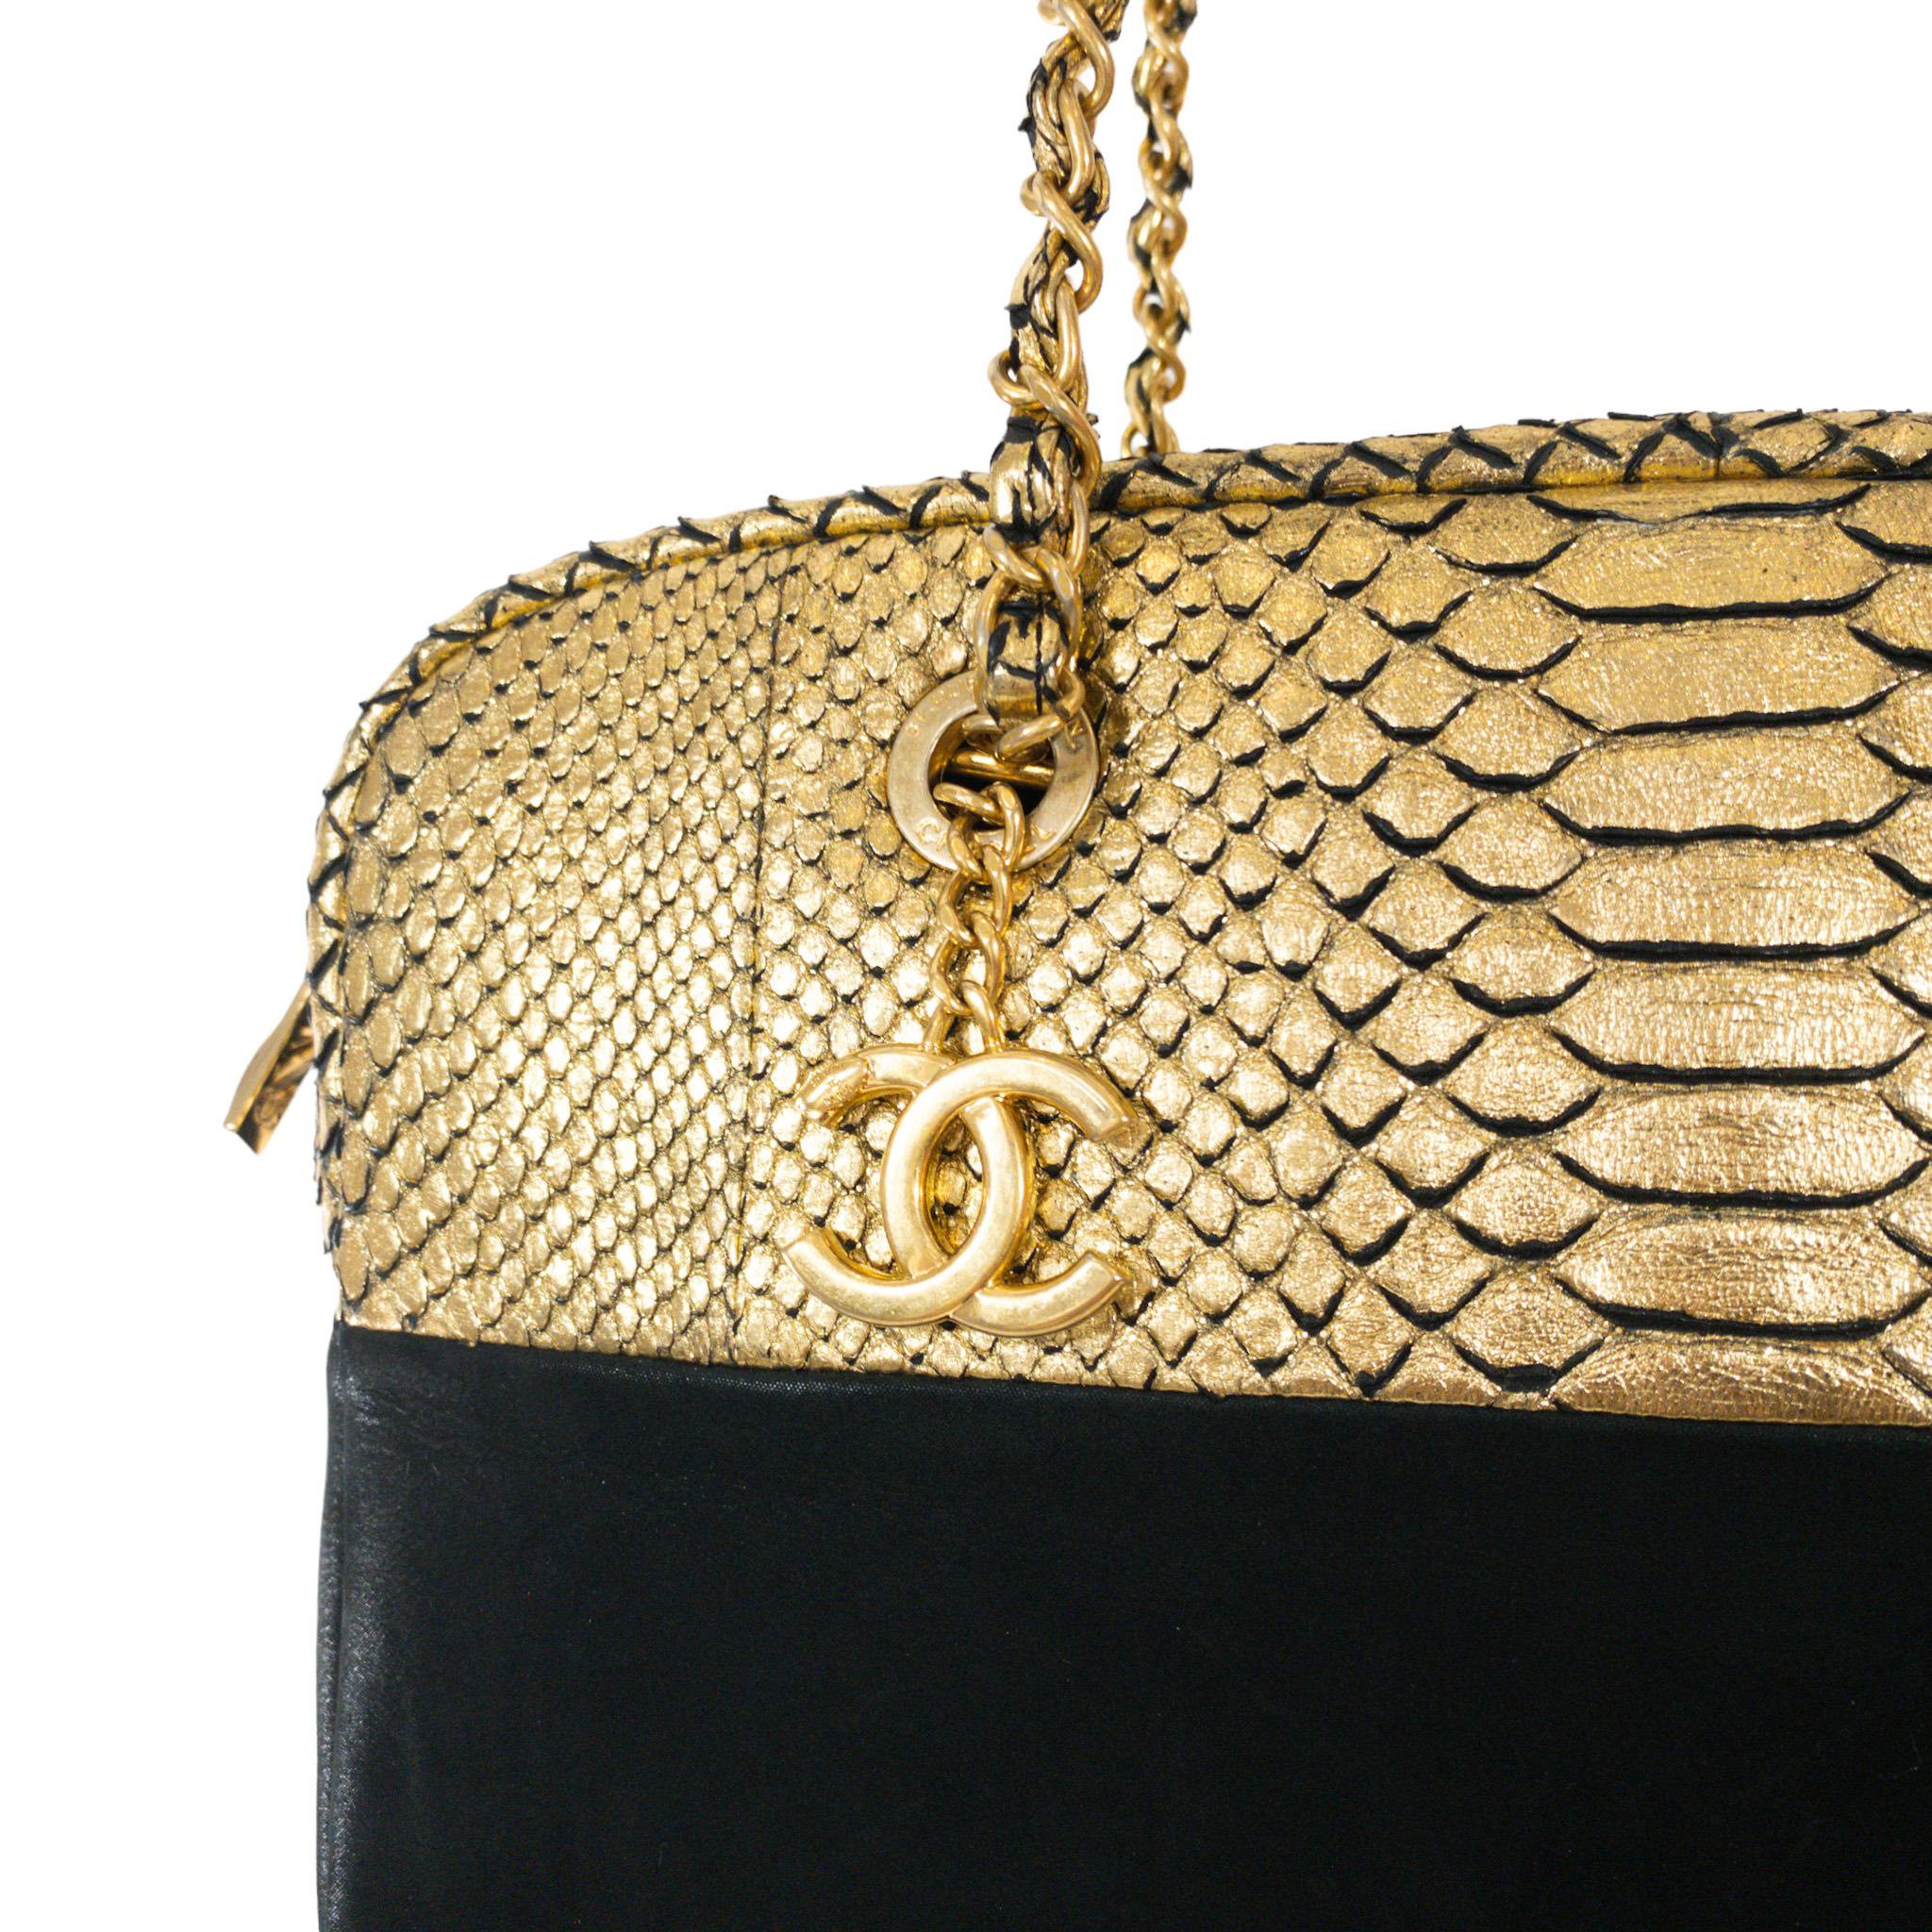 Women's Chanel Metallic Python Suede Bowler Tote Bag For Sale